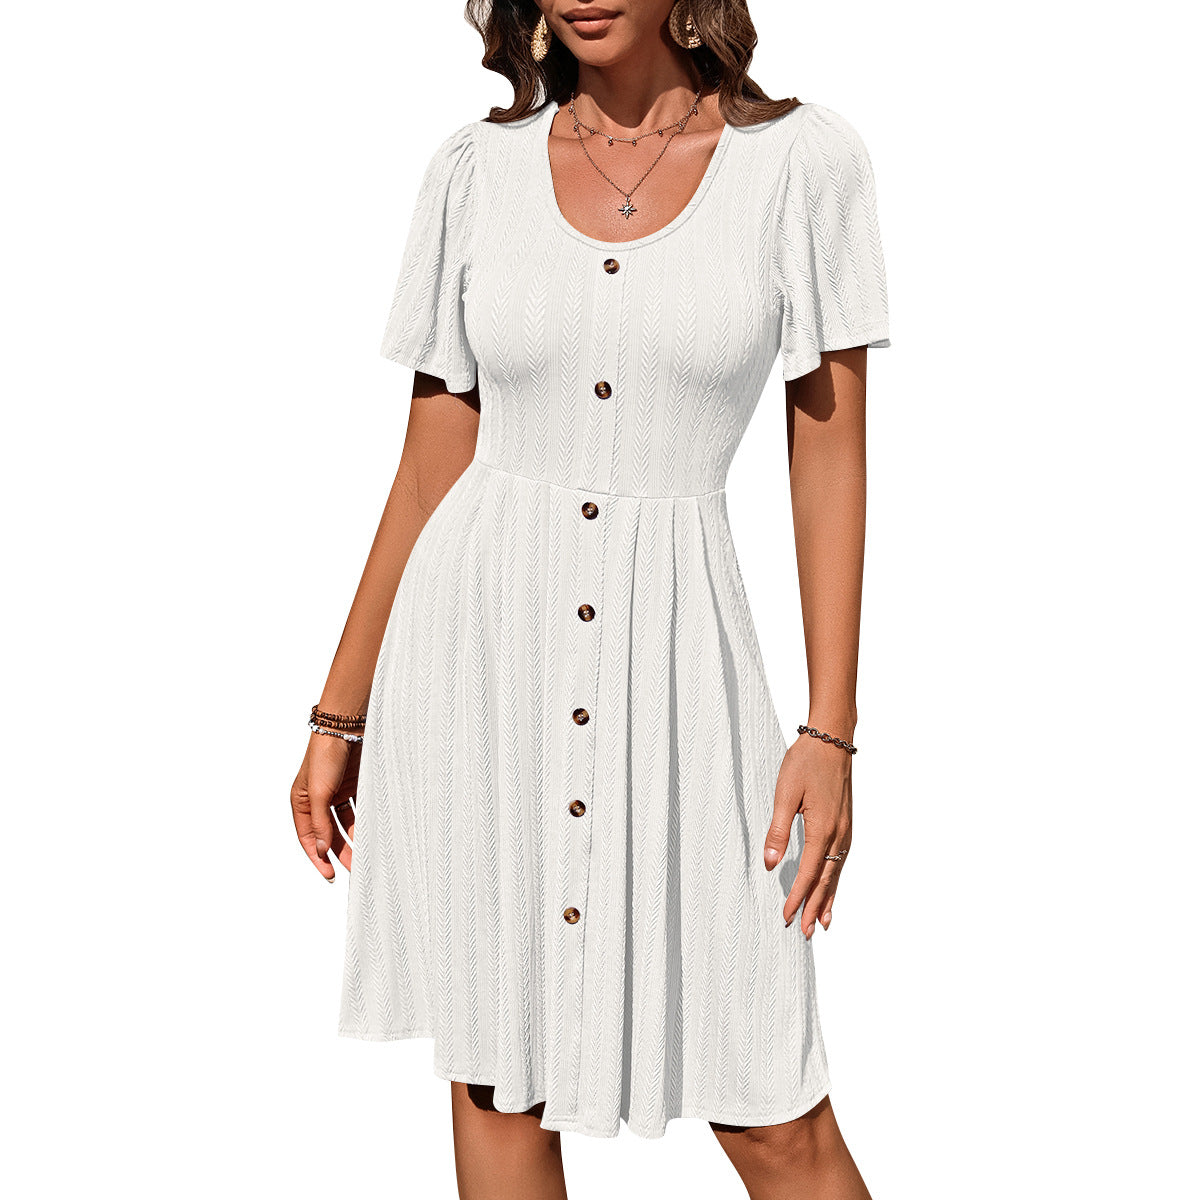 Summer U-neck Short-sleeved Dress With Button Design Fashion Casual Solid Color Holiday Dress For Womens Clothing